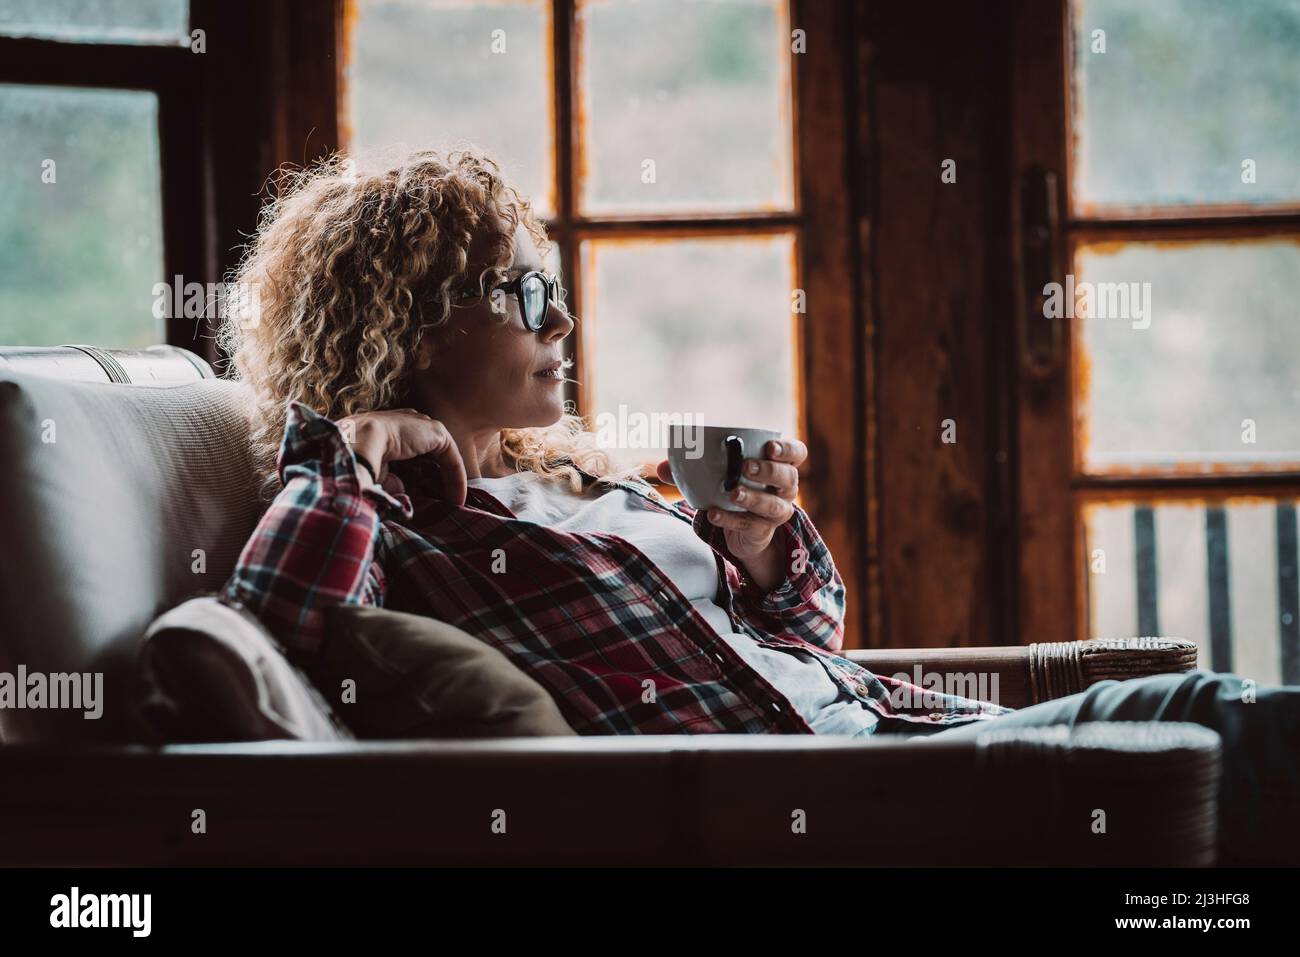 woman, blonde, curls, check shirt, armchair, cozy, sit, side, cup, hold Stock Photo